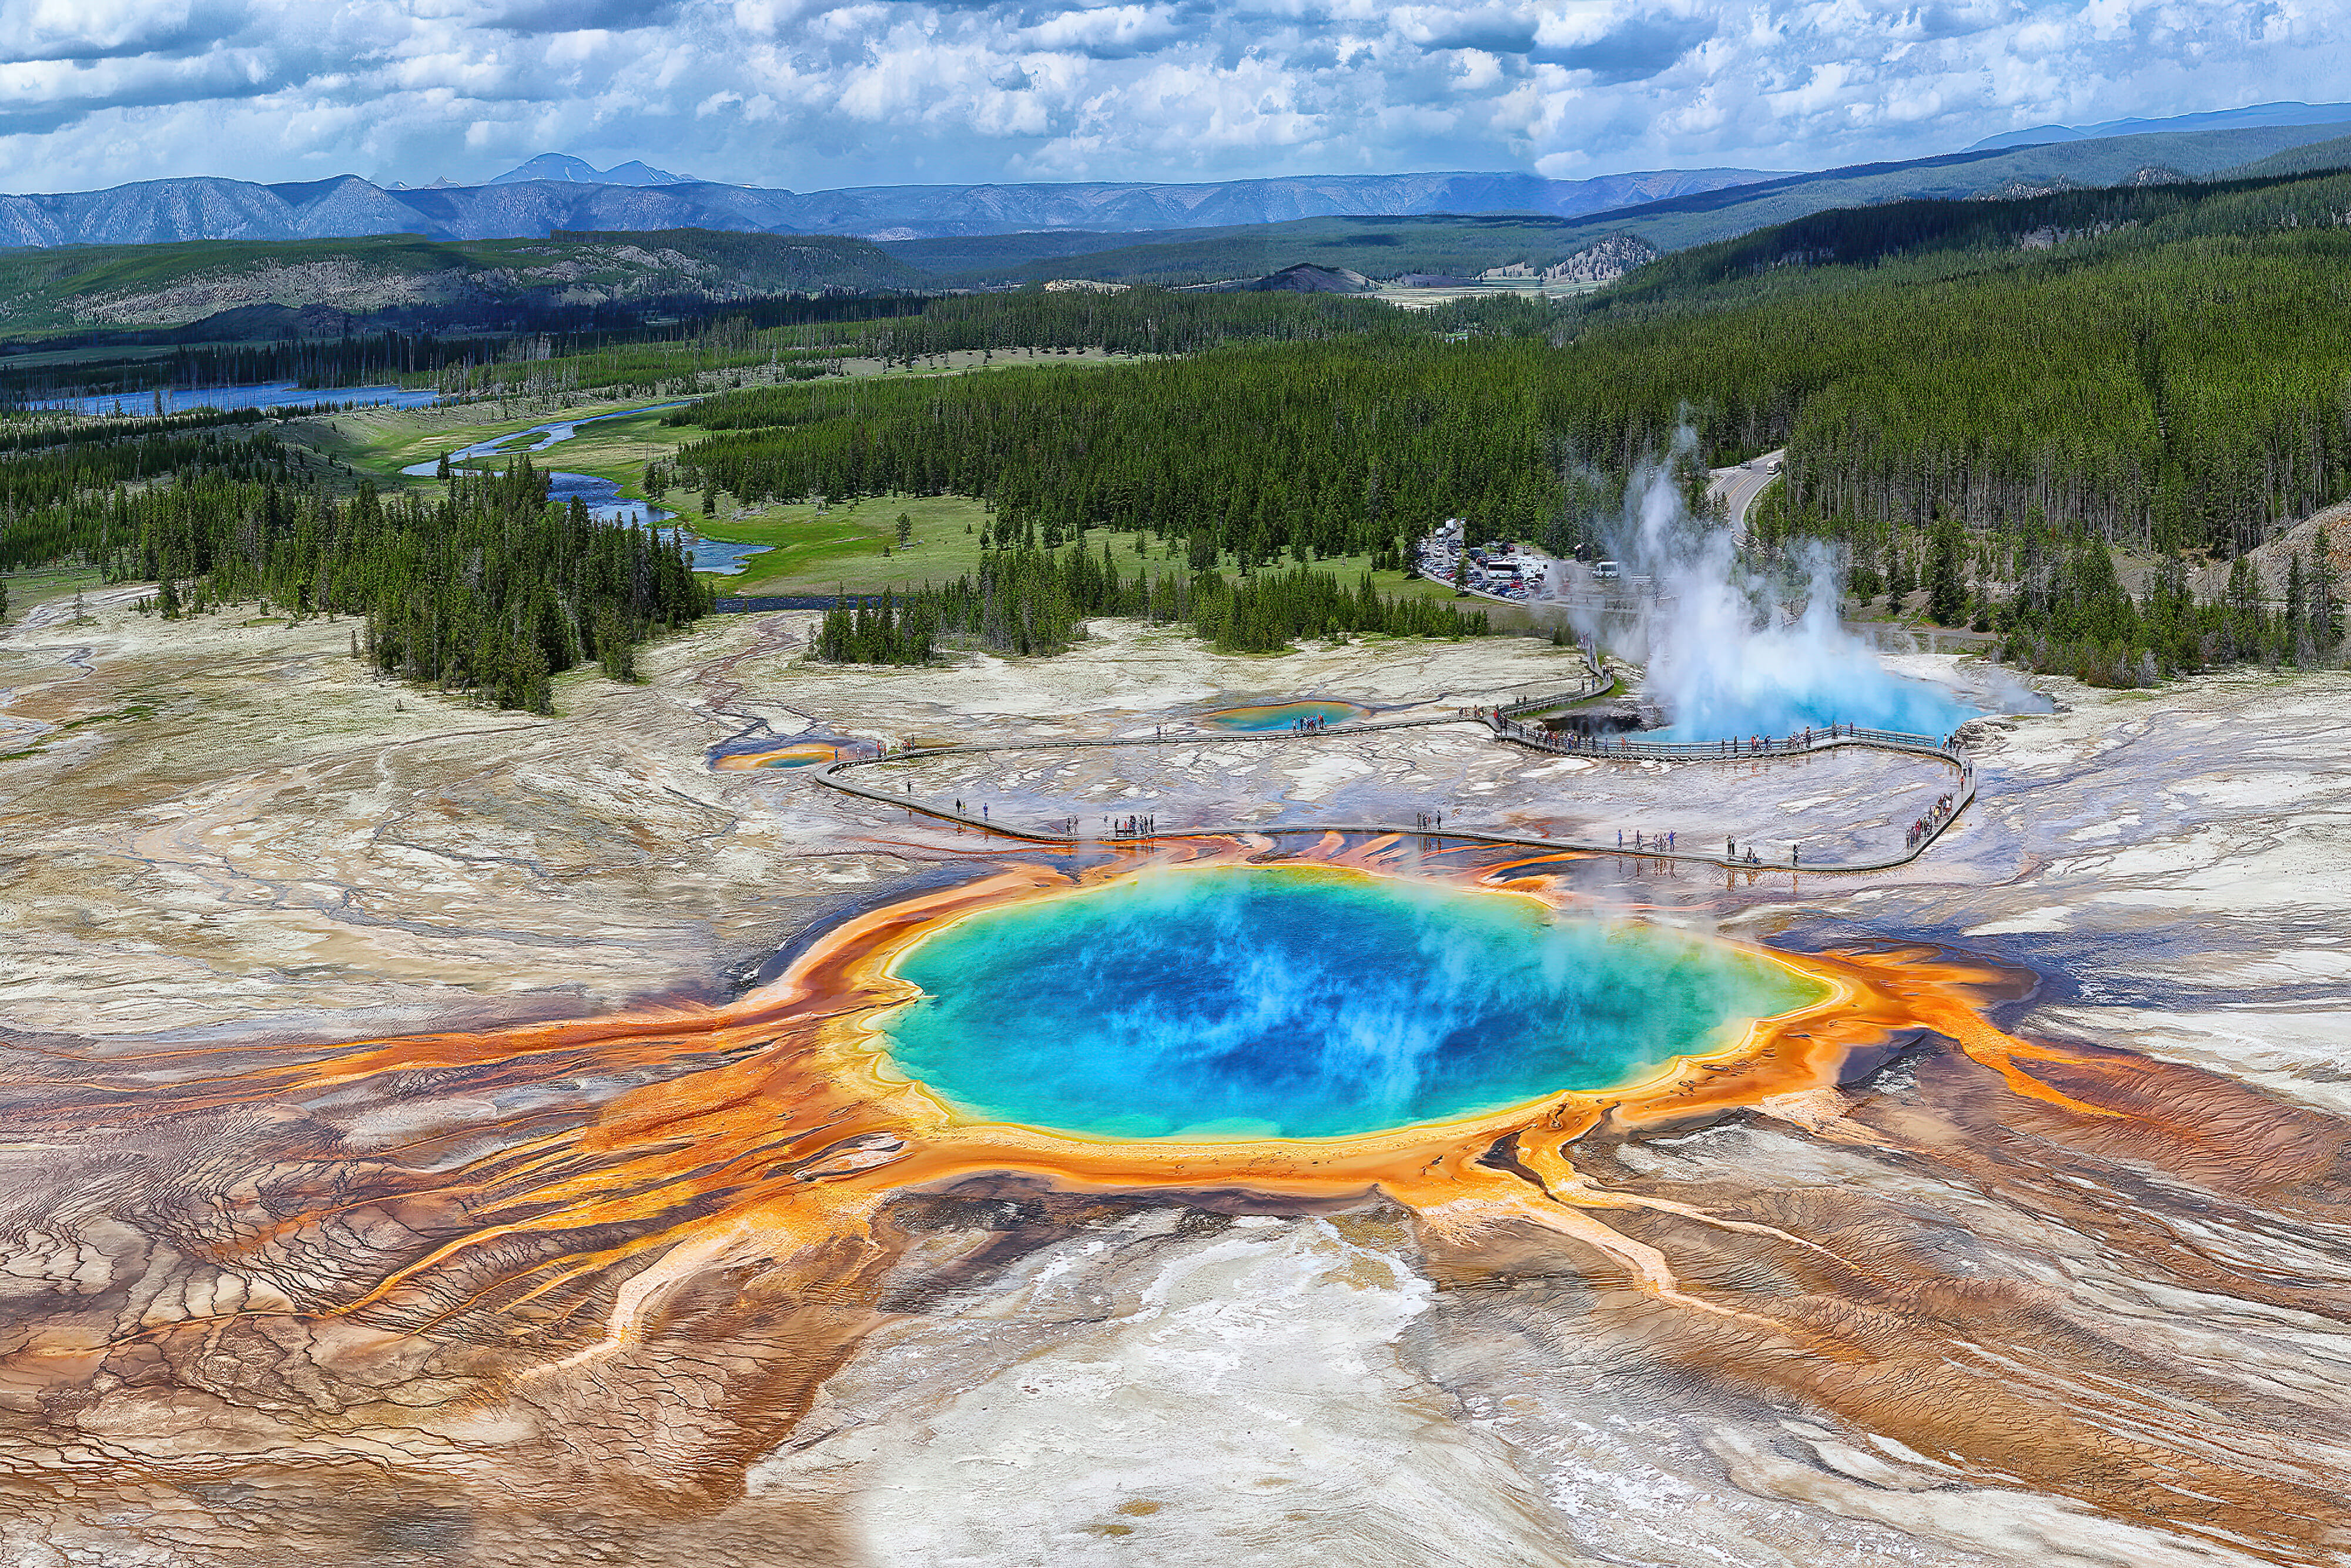 A vibrant view of the Grand Prismatic Spring in Yellowstone National Park, Wyoming, USA